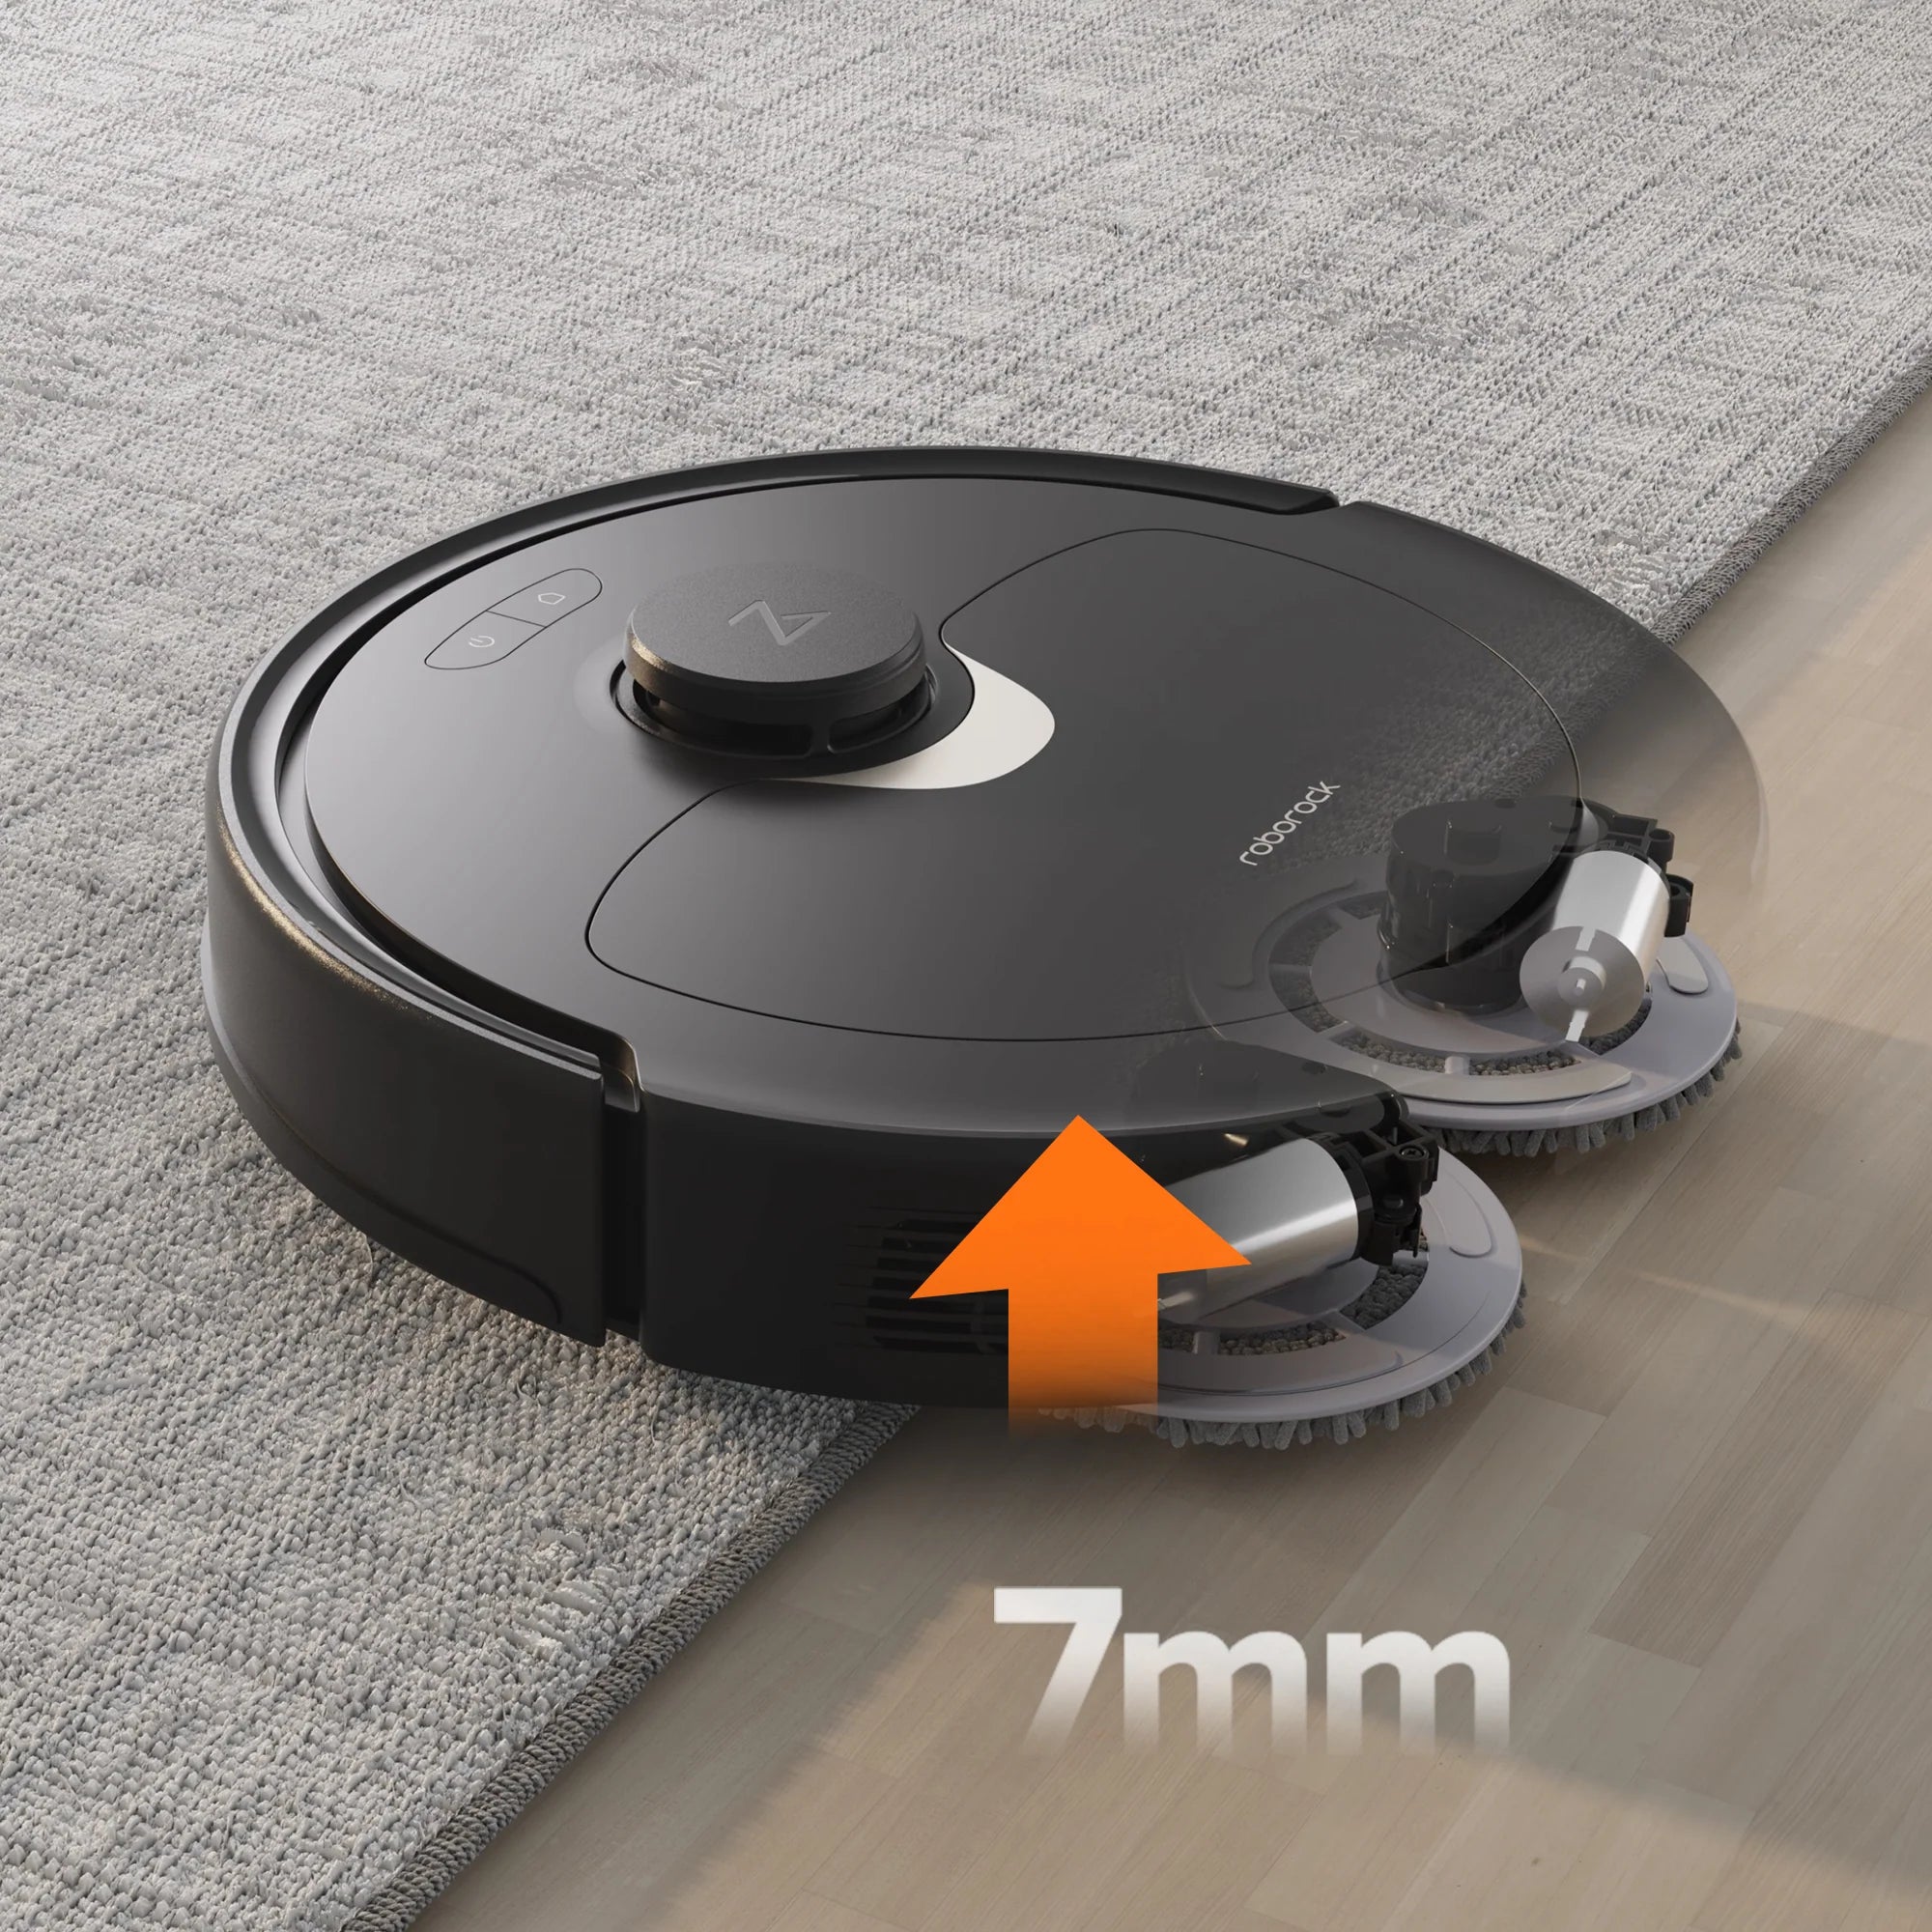 RoboRock Q Revo is the Goldilocks of Robot Vacuums - Potions - For Your  Inner Geek